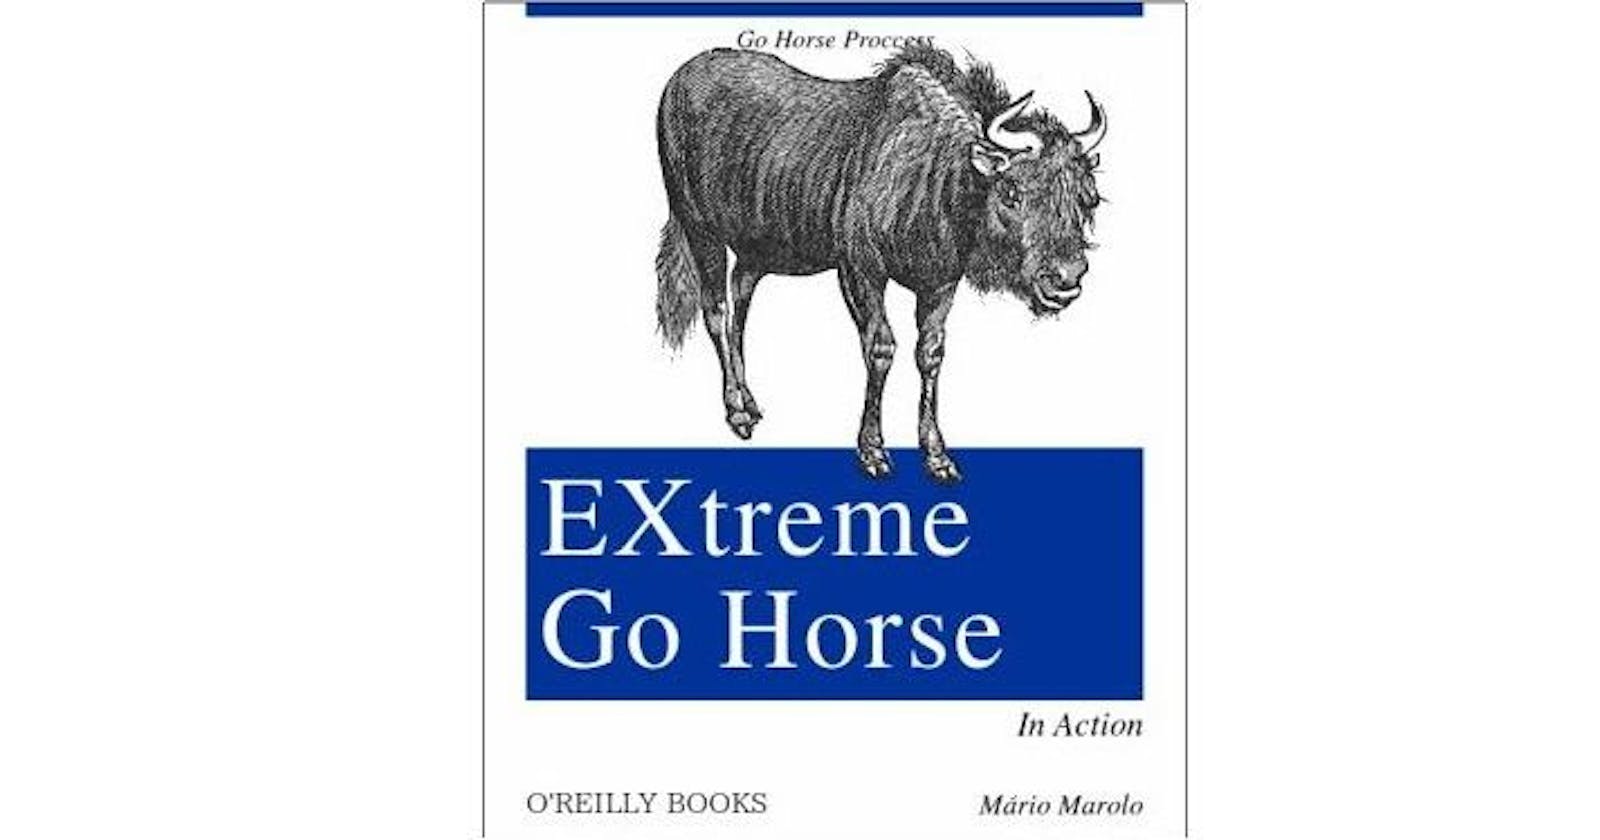 eXtreme Go Horse (XGH) Process Source